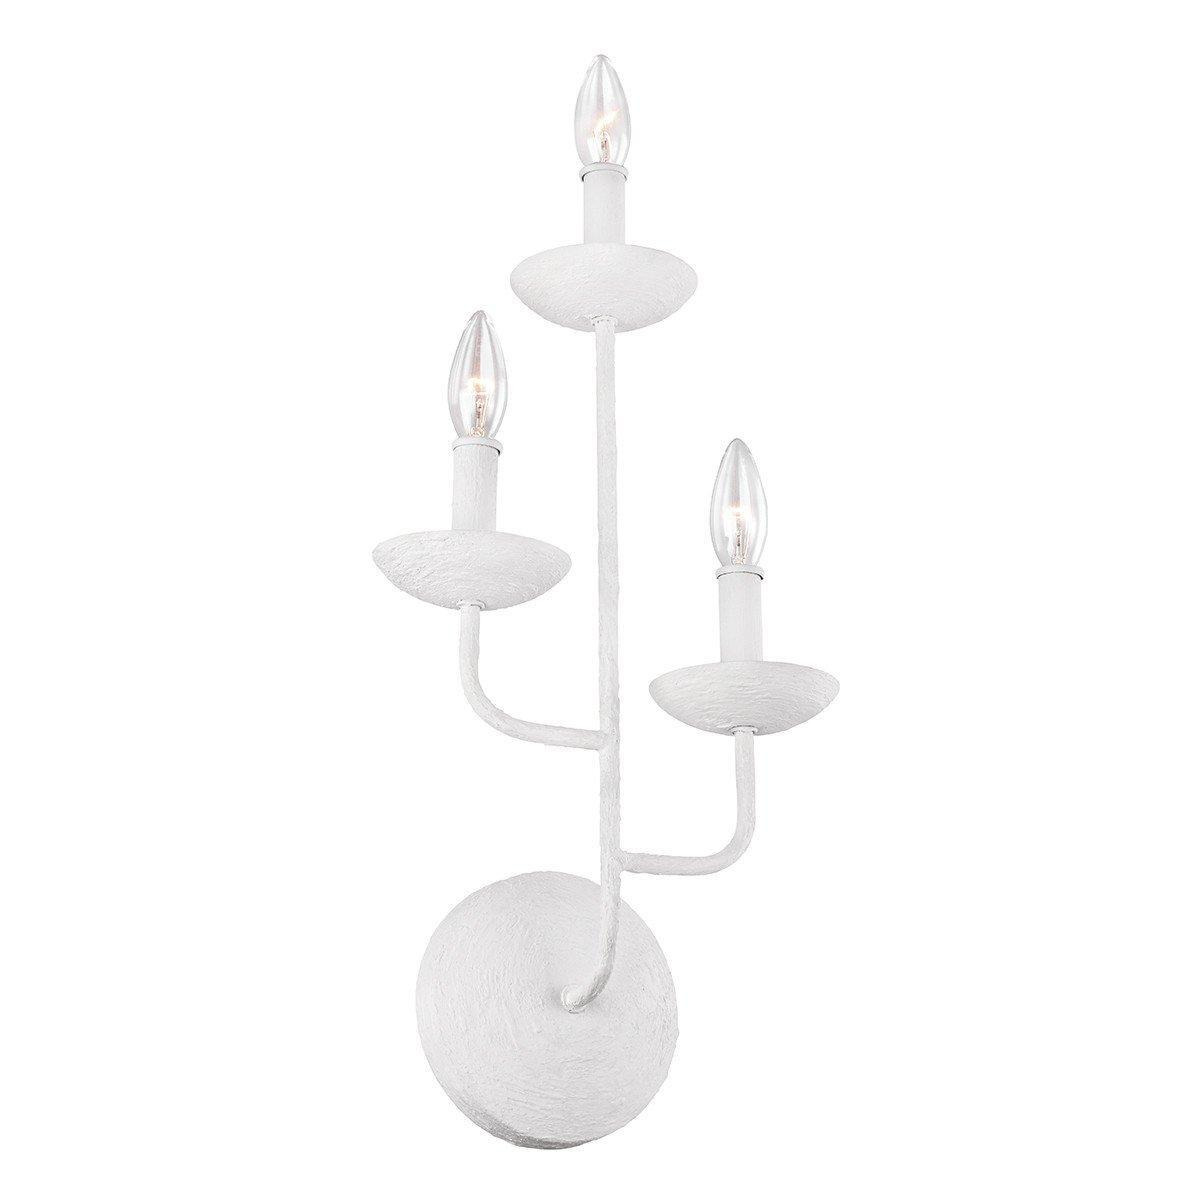 Feiss Annie Candle Wall Lamp Plaster White - image 1